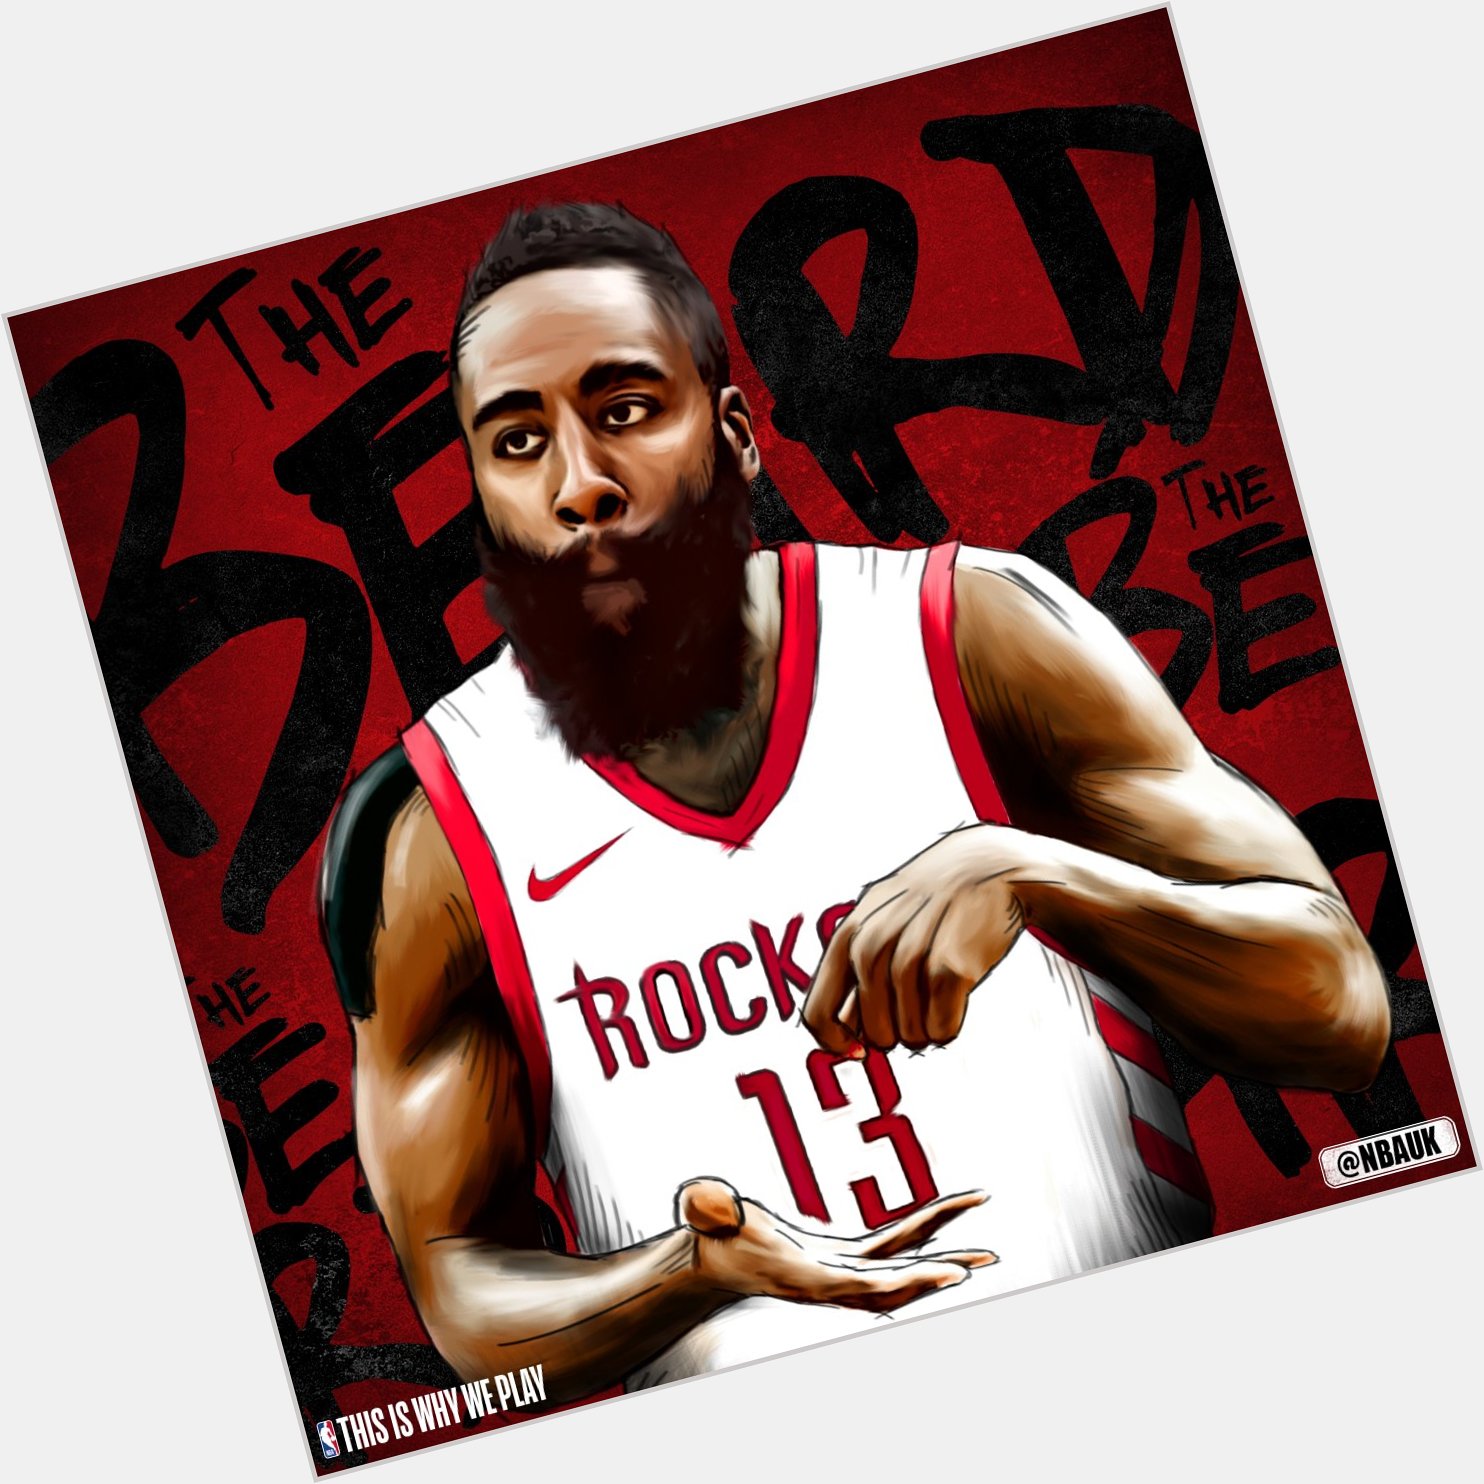   Join us as we wish 5x NBA All-Star James Harden a very happy birthday! 